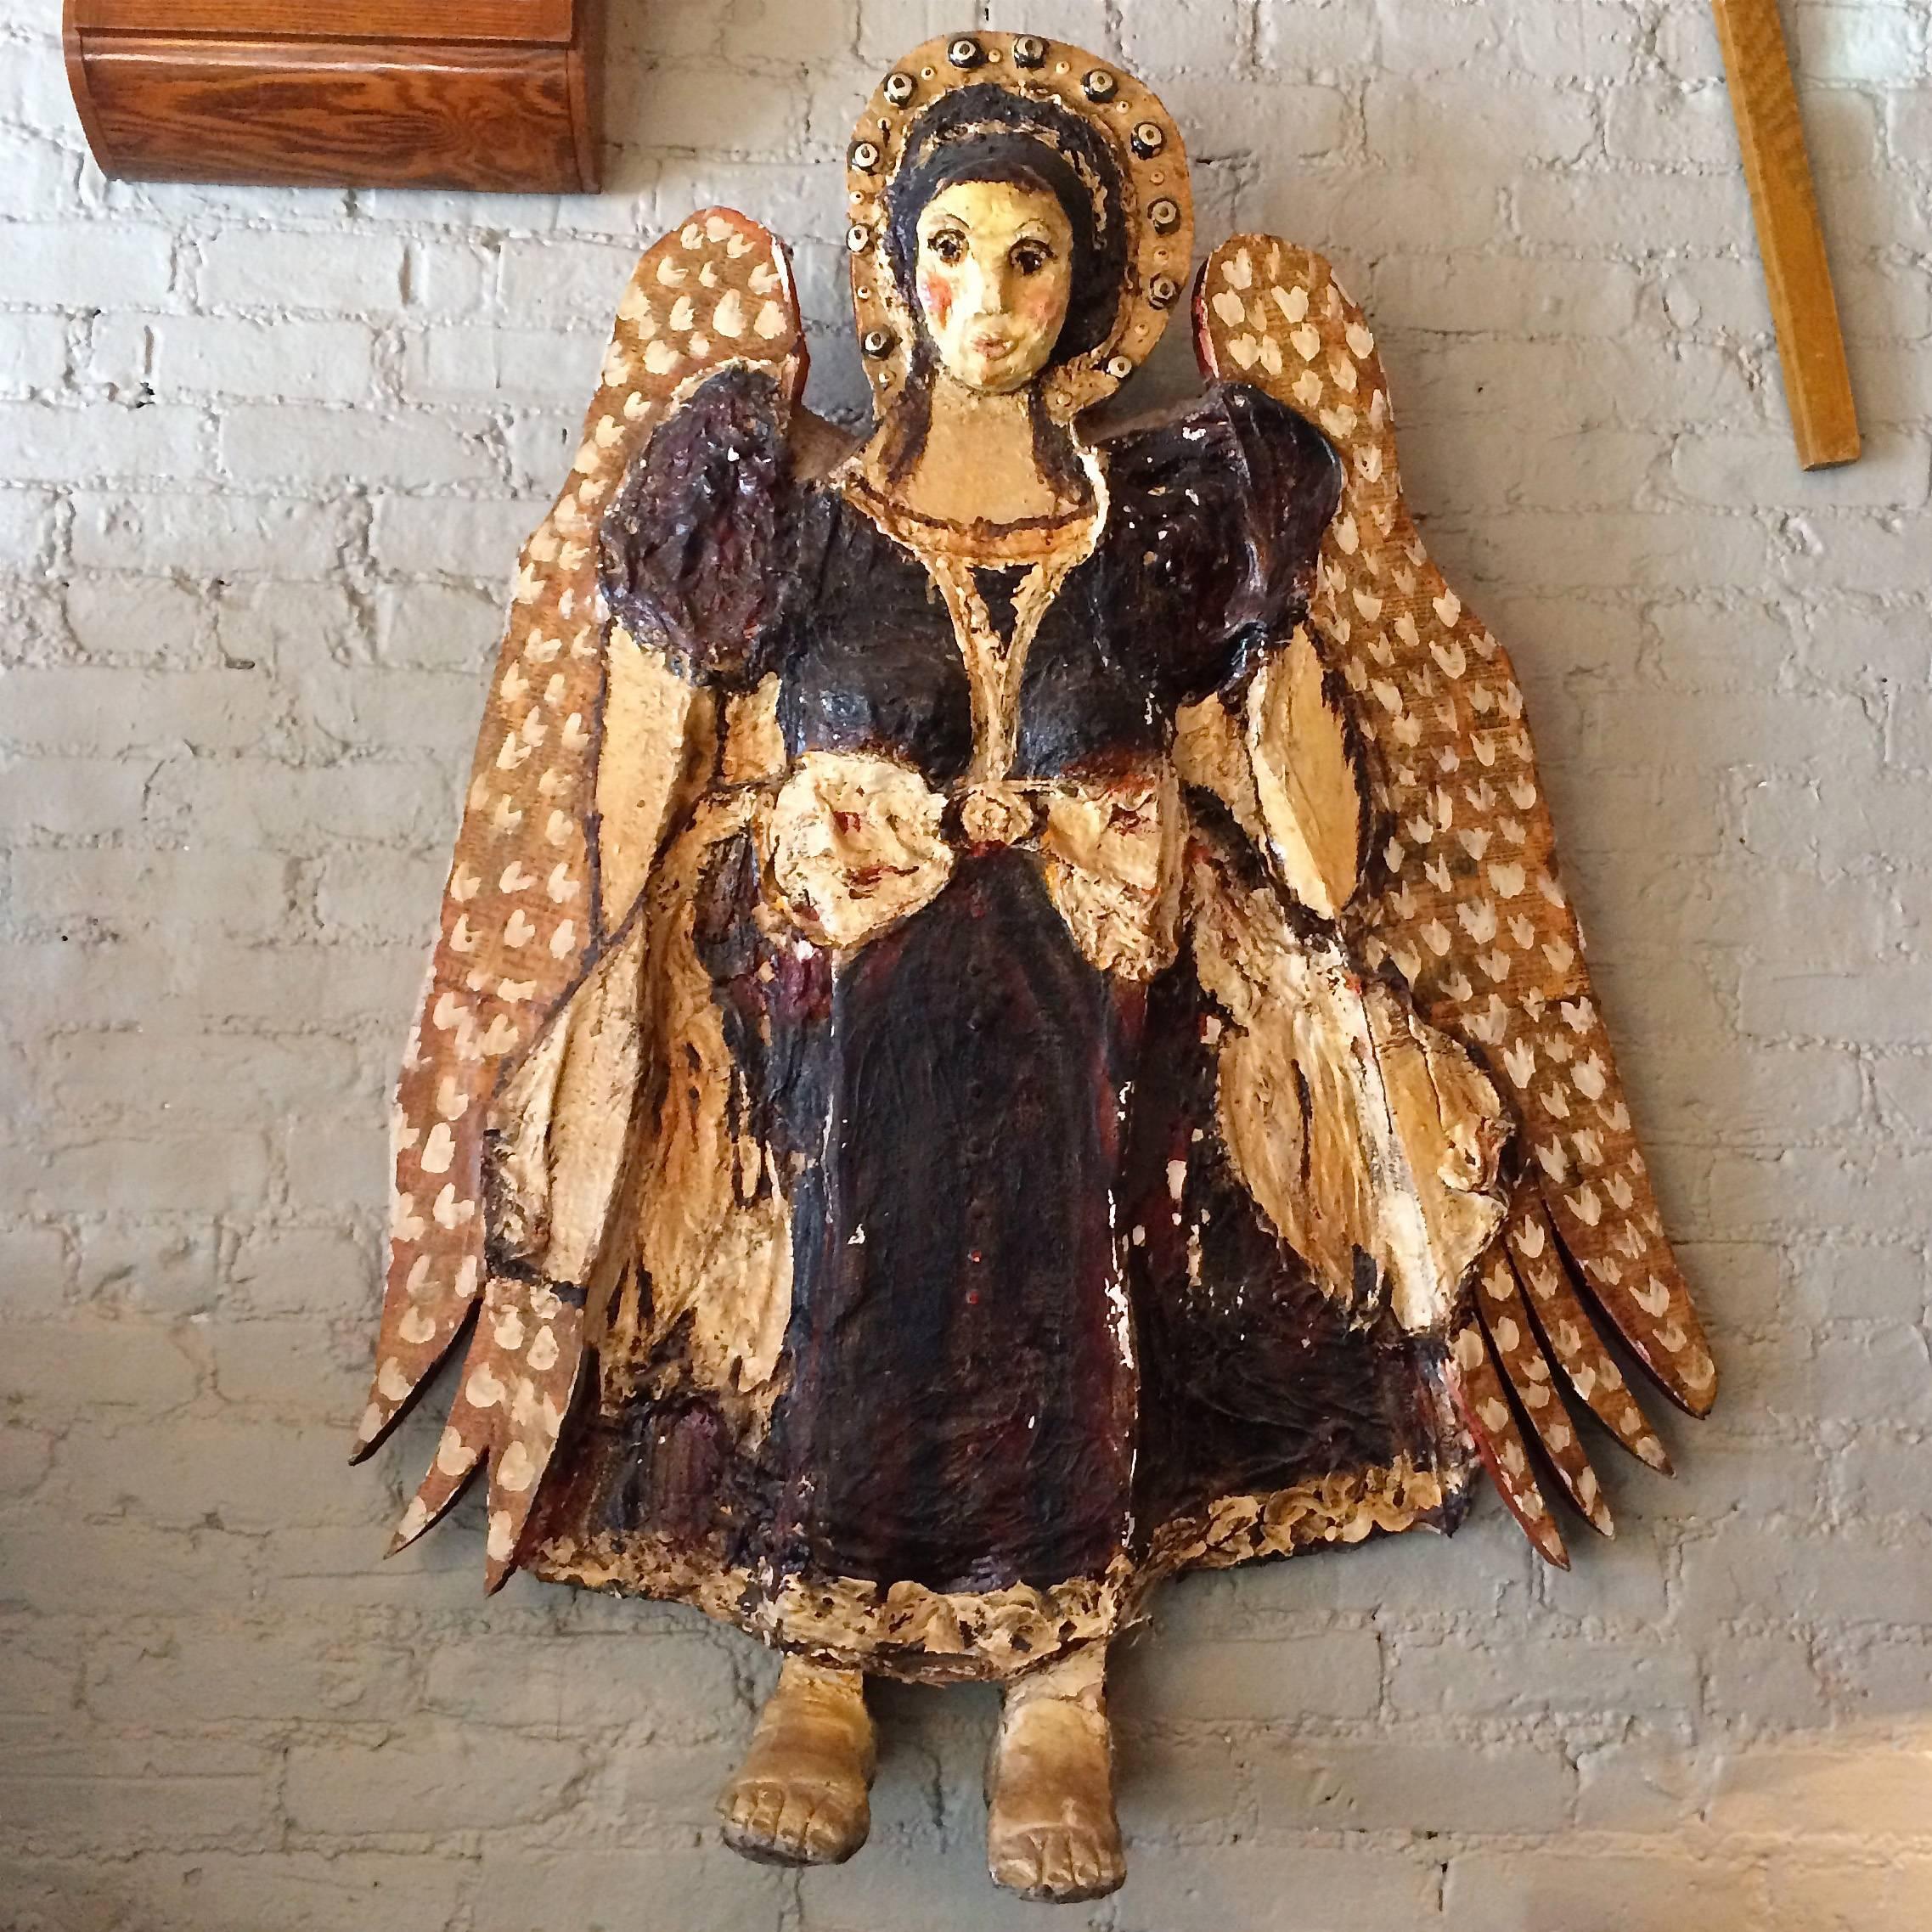 Large, mixed media, Folk Art angel is plaster sculpture with acrylic paint on wood cutout with newspaper backing on her wings. The angel is signed and dated 1968 by the Danish born artist. This artist's work also includes our listing of the Large